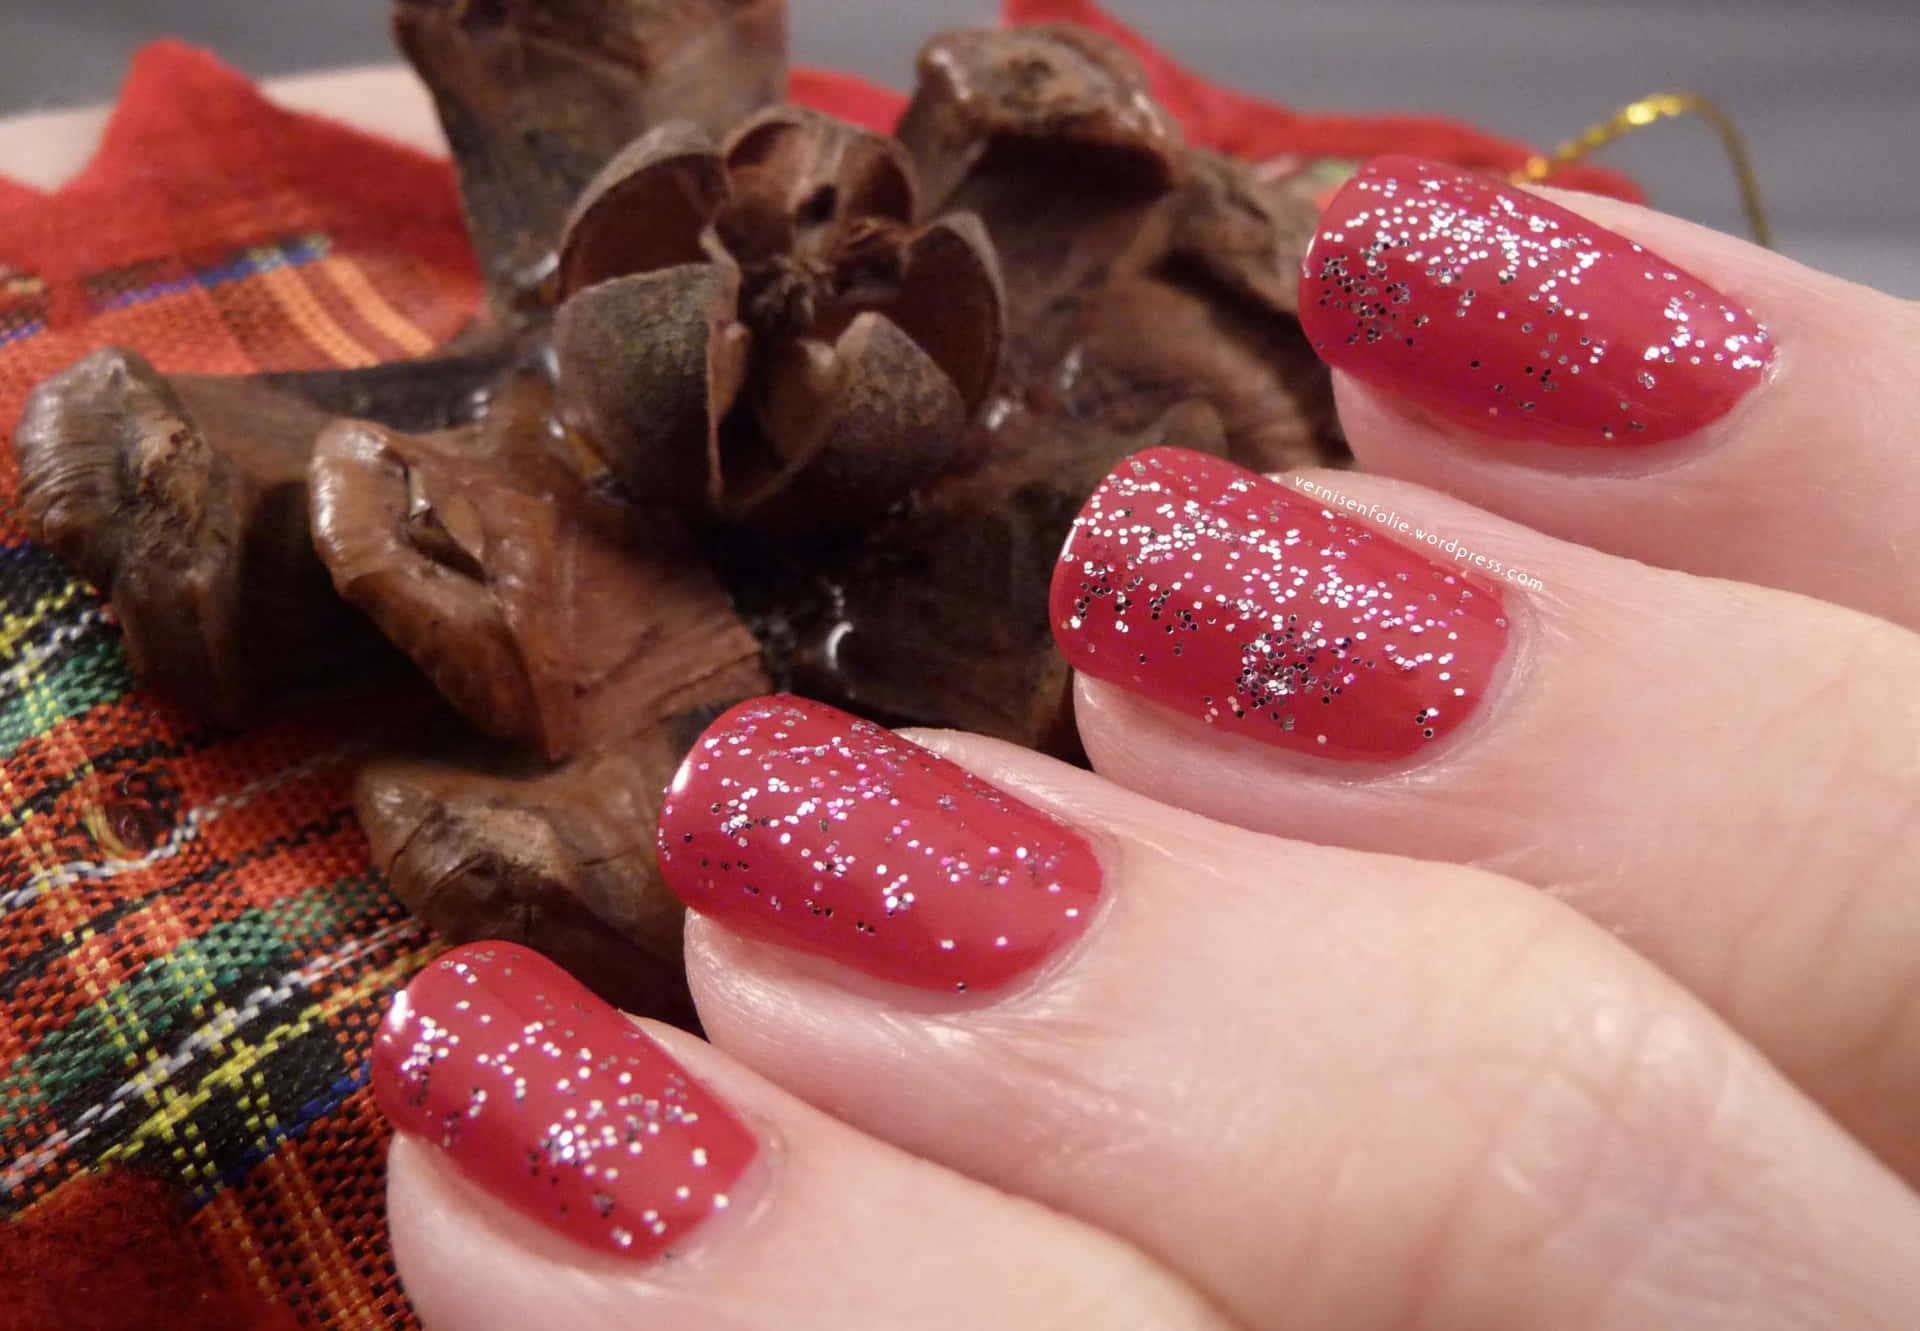 A Woman Holding A Red Nail Polish With Glitter